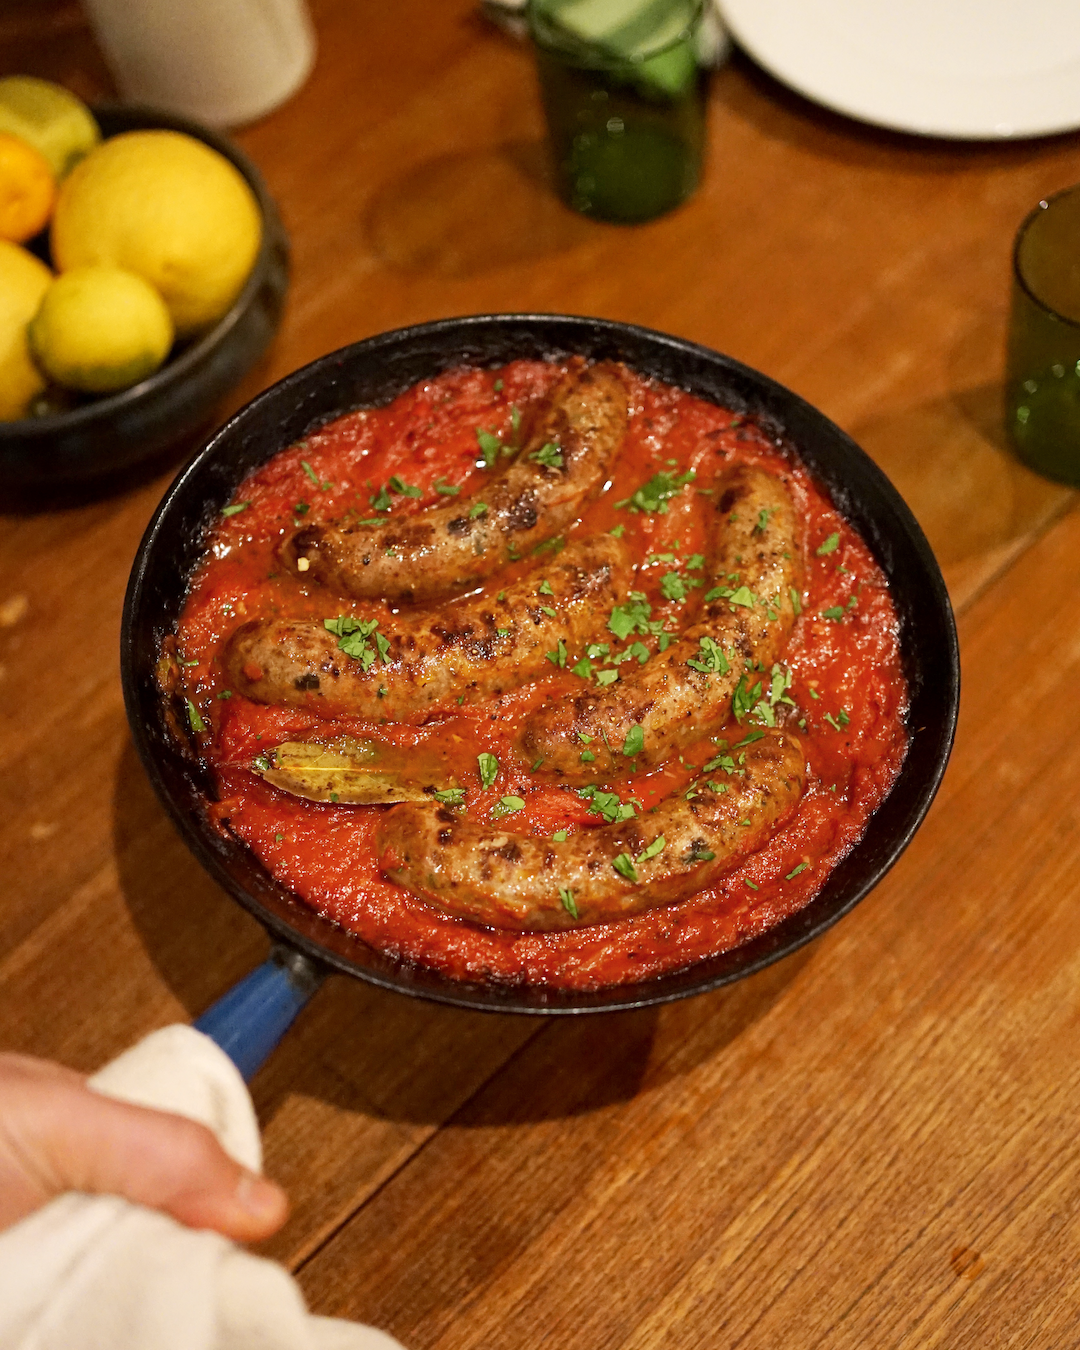 Baked Italian Sausages with Tomato